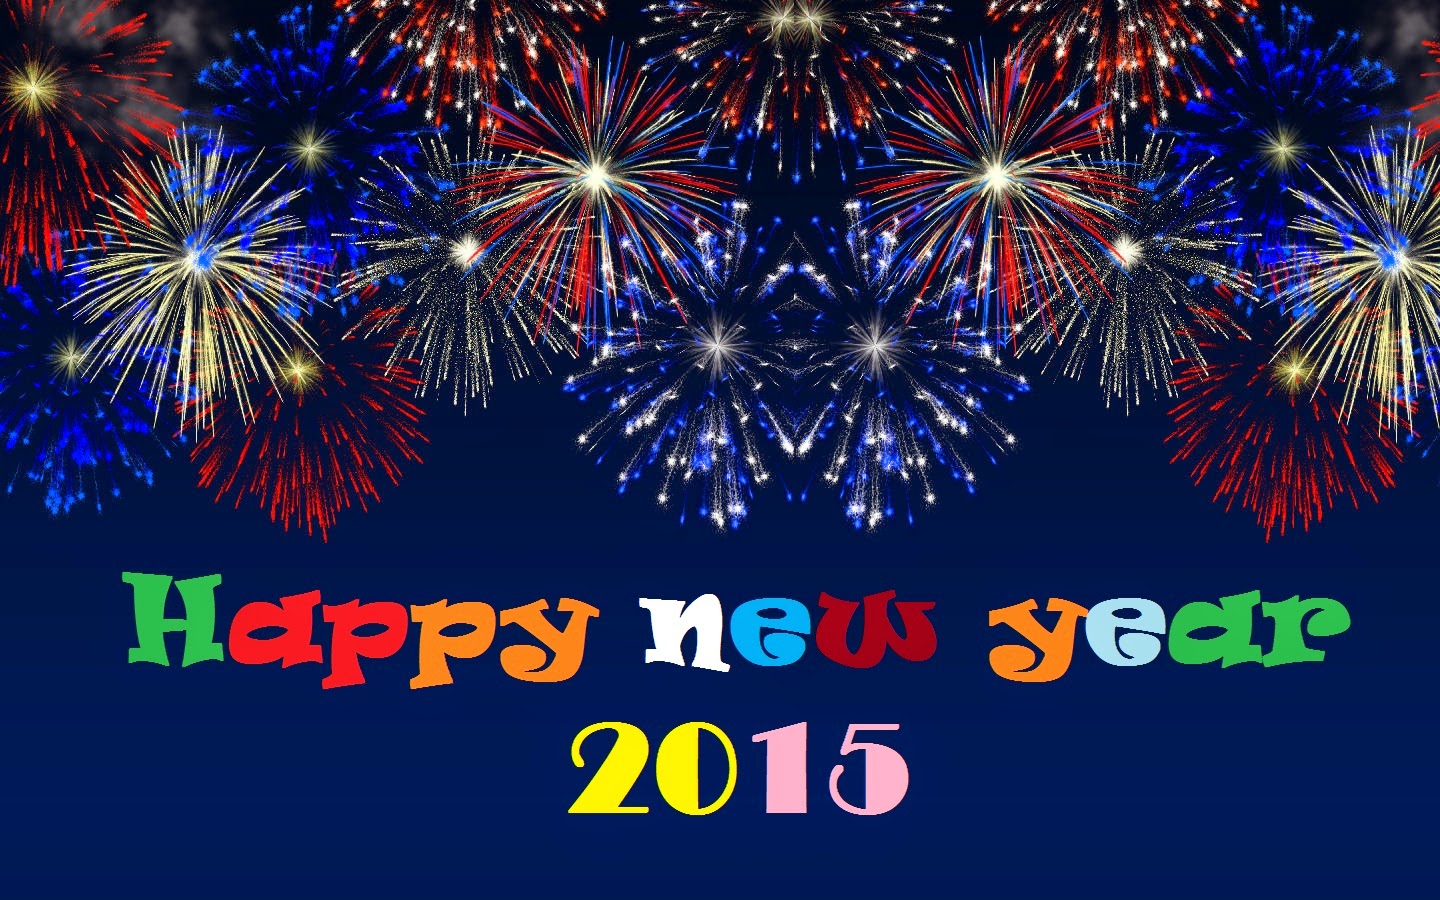 holiday, new year 2015, celebration, fireworks, new year, party